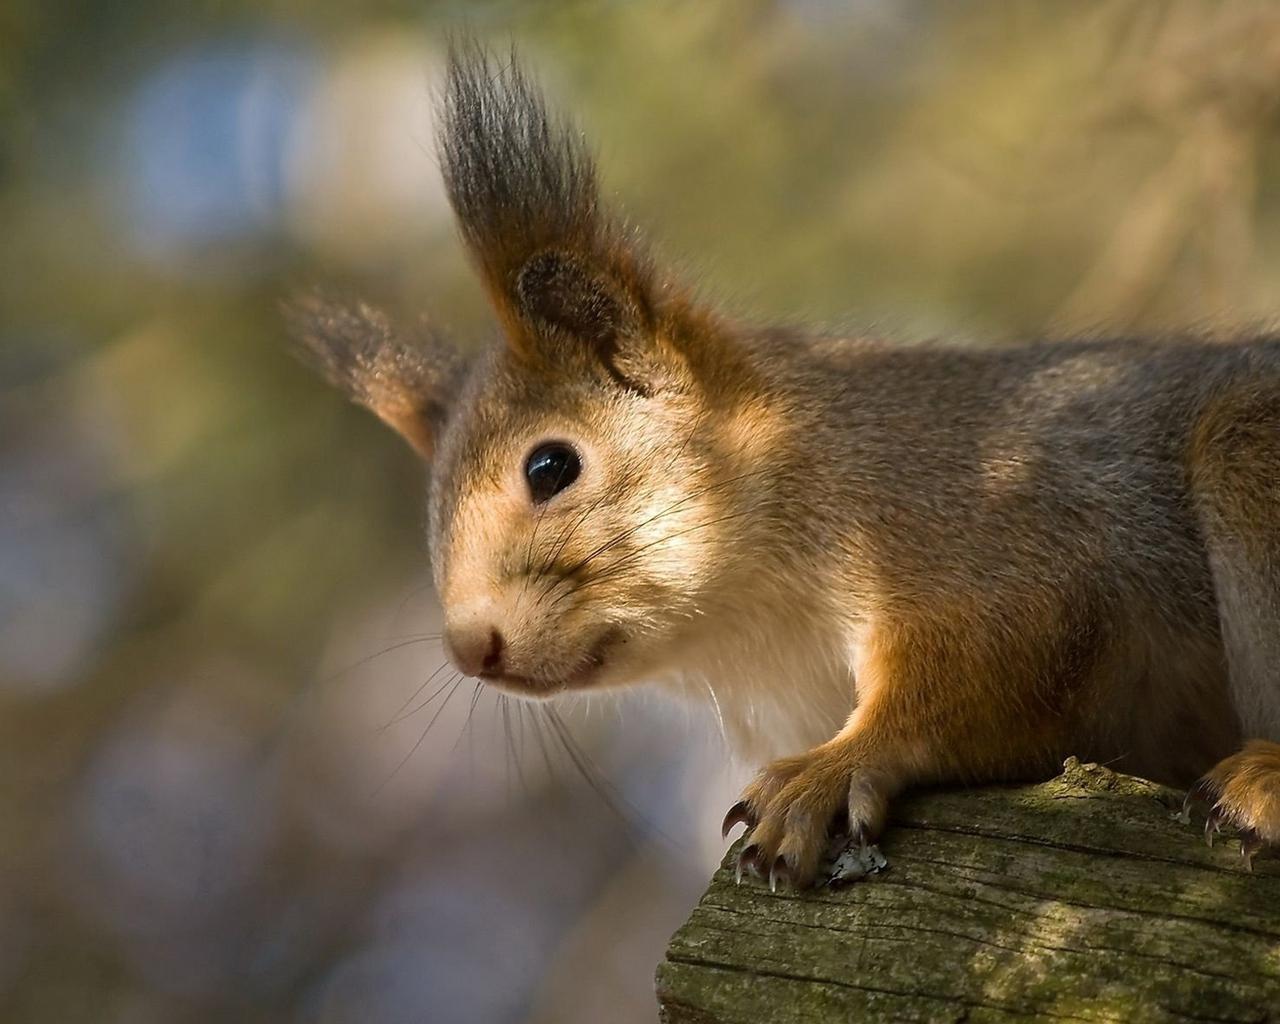 Download wallpaper 1280x1024 red, squirrel, ears, funny